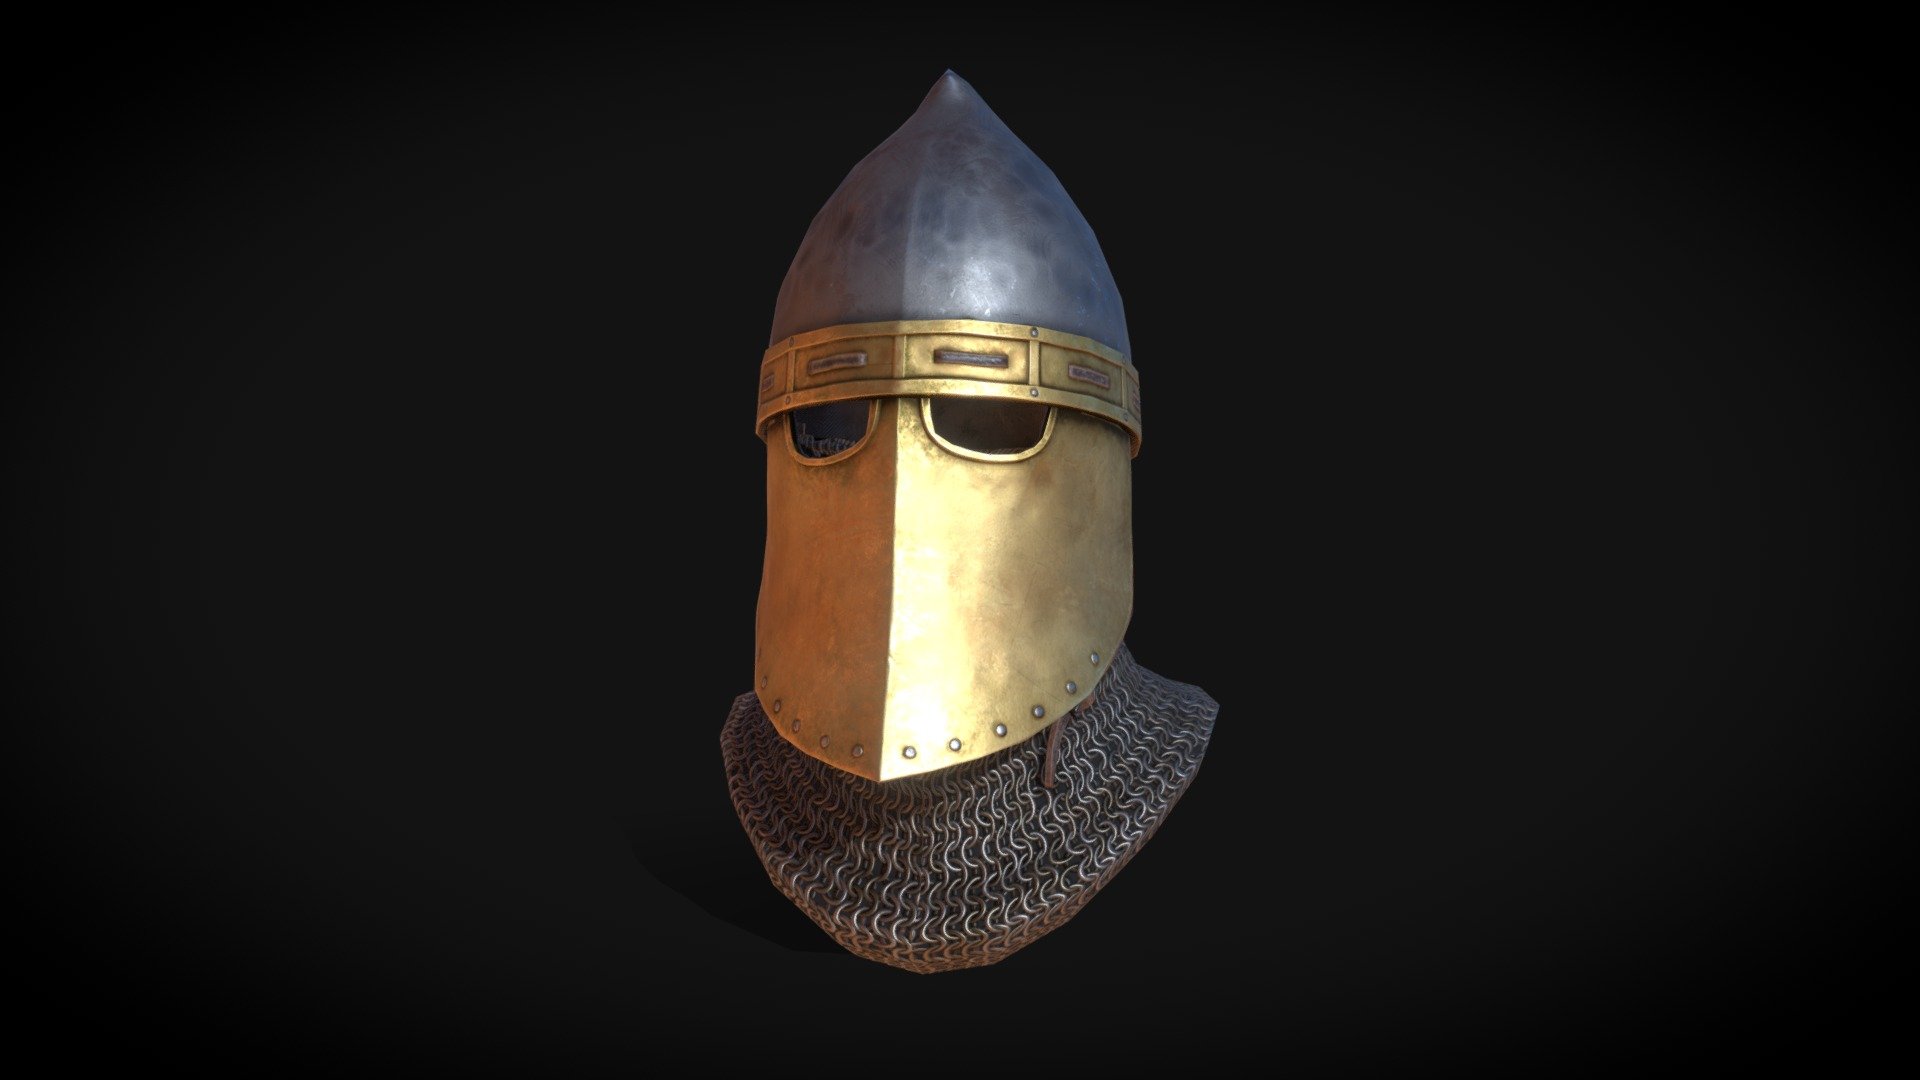 Helmet i made for a mod in the game Mount and blade Bannerlord 3d model